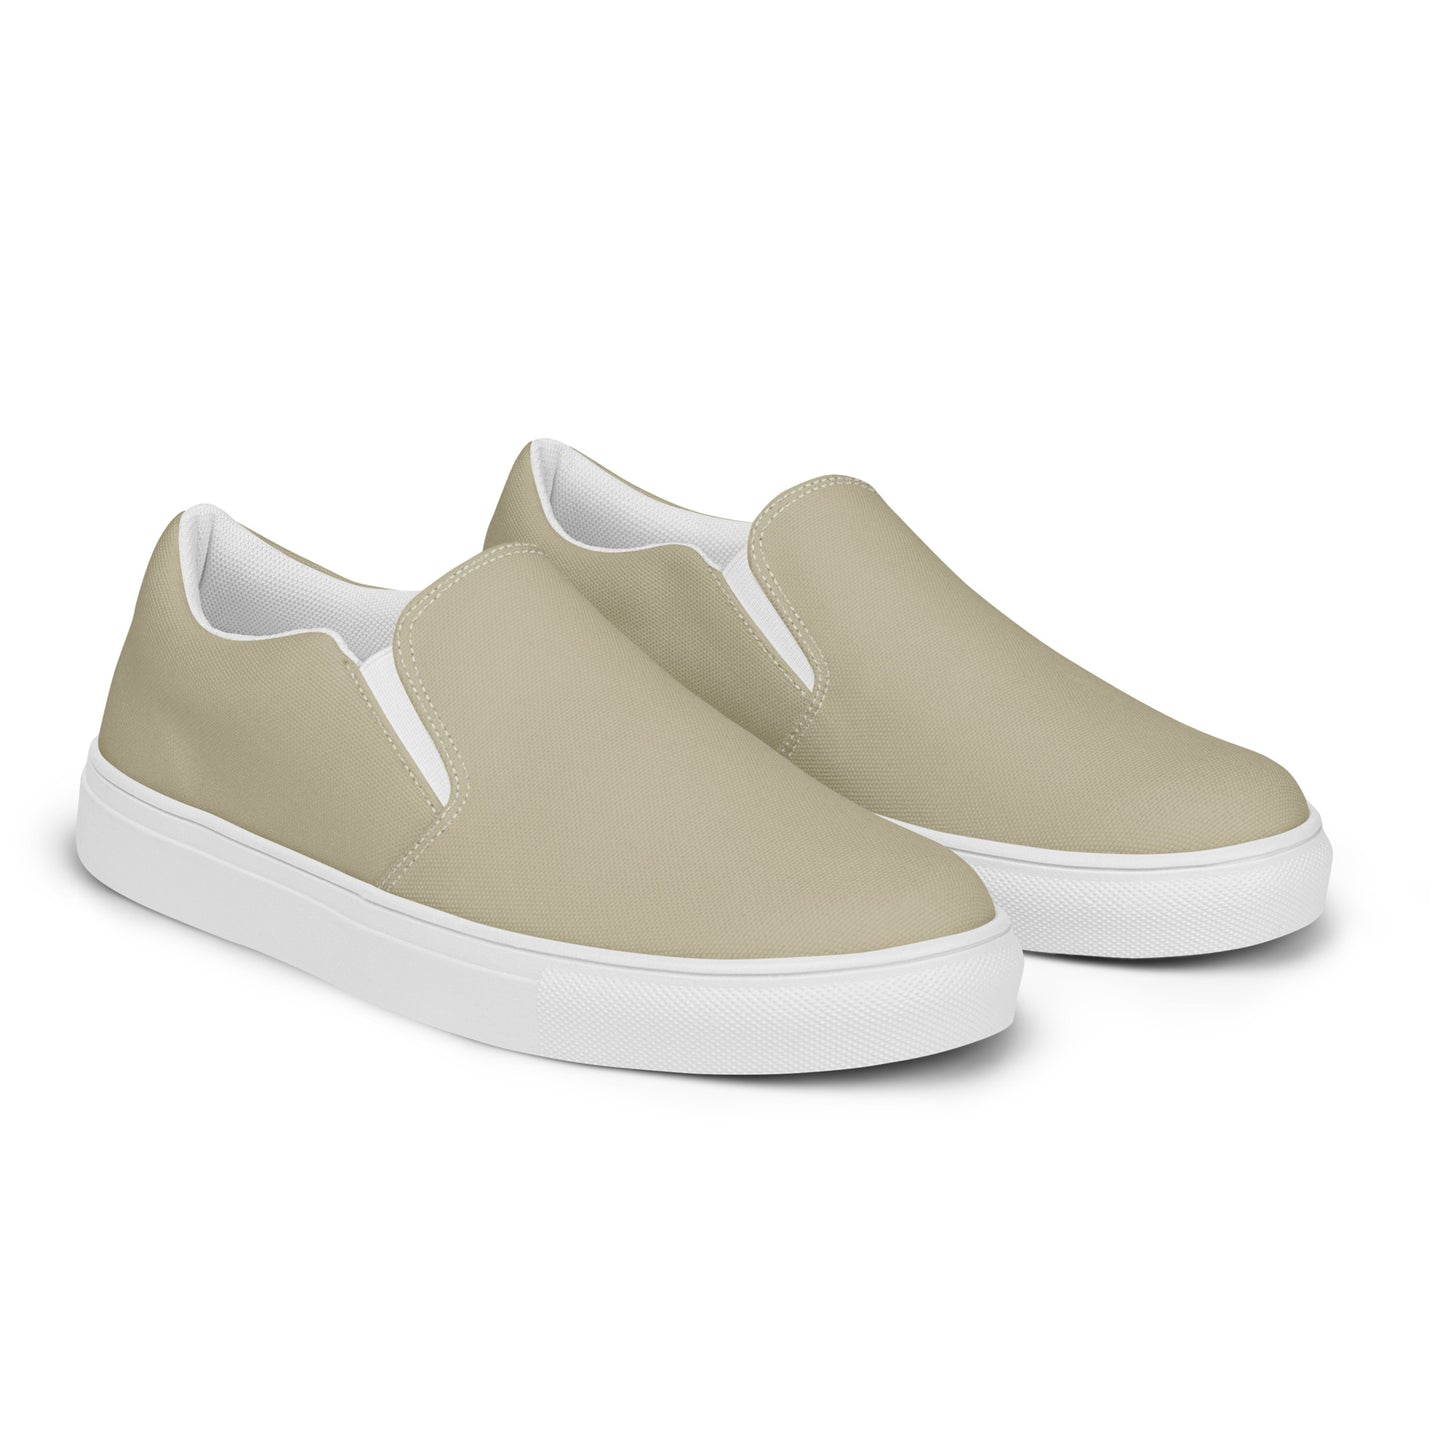 Men’s RT Caribbean Sand slip-on canvas shoes, Cruising Shoes, Boat Shoes